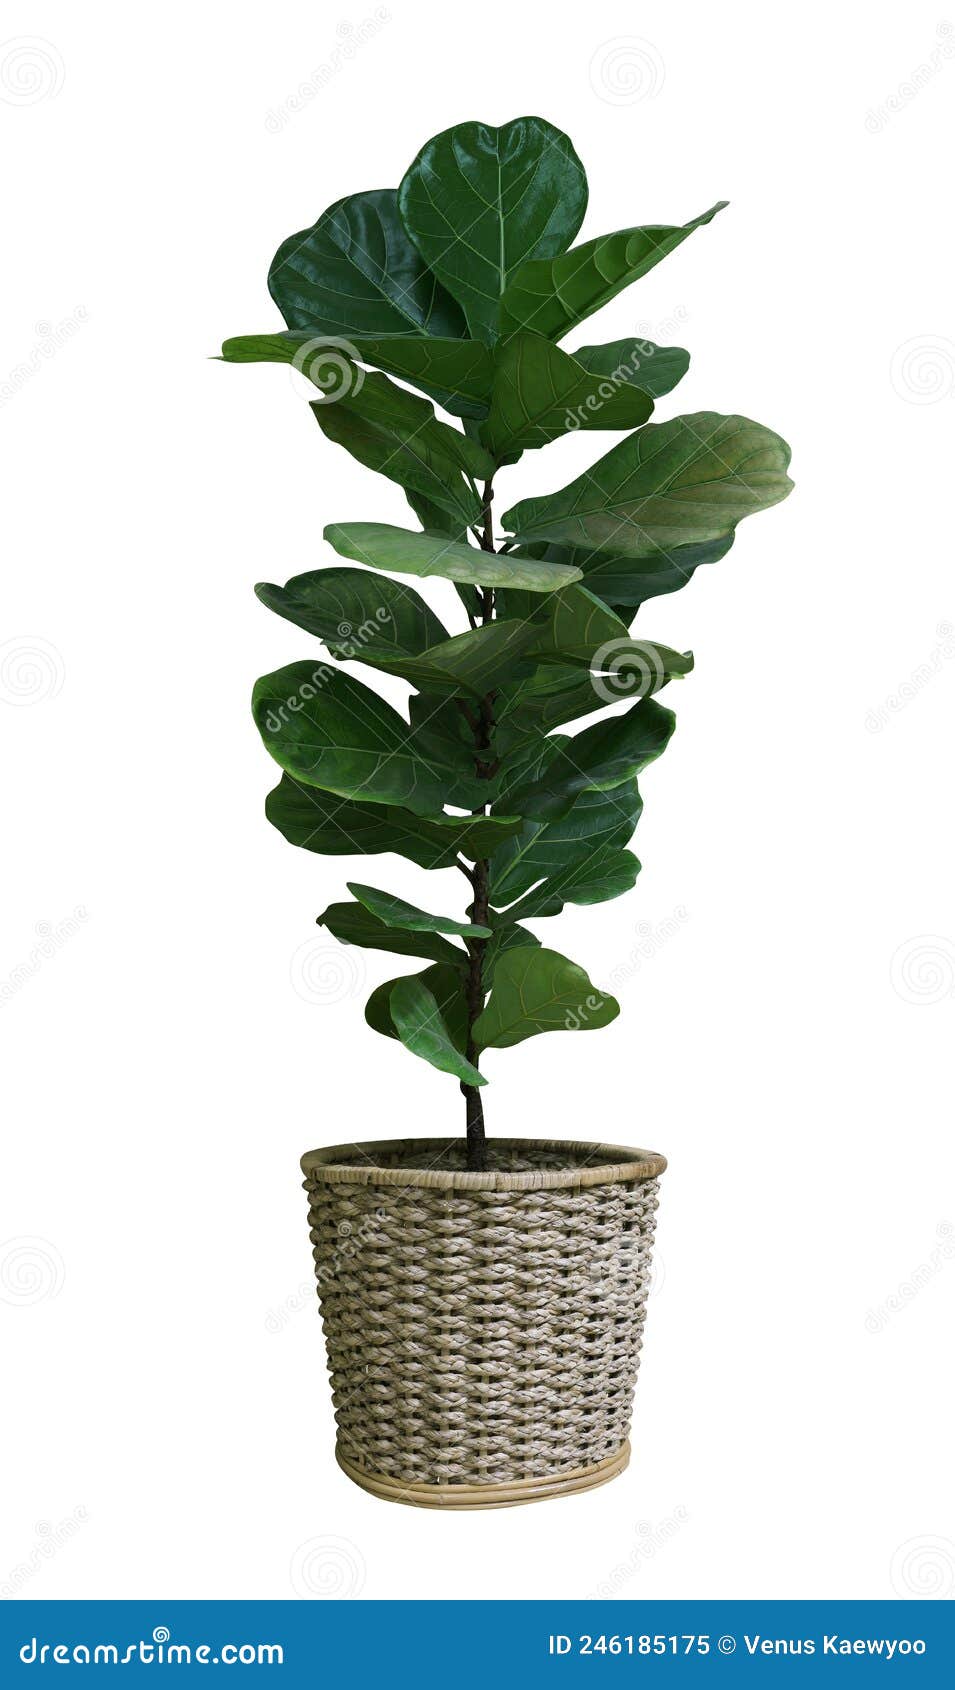 green leaves tropical houseplant fiddle-leaf fig tree ficus lyrata in small ceramic pot, ornamental tree  on white